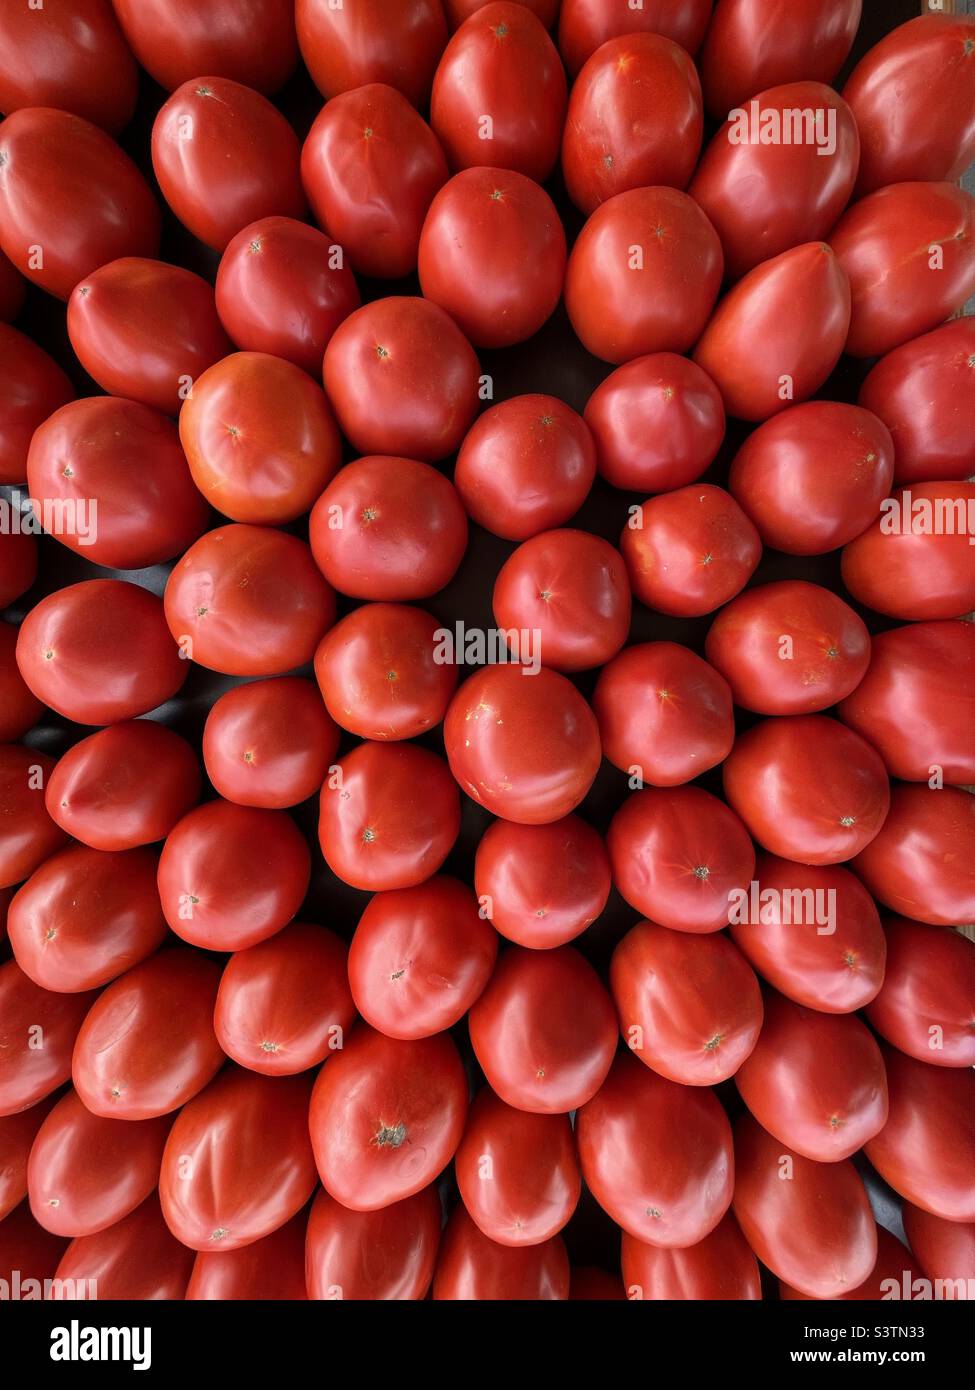 Tomatoes at a produce stand. Red tomatoes. Stock Photo